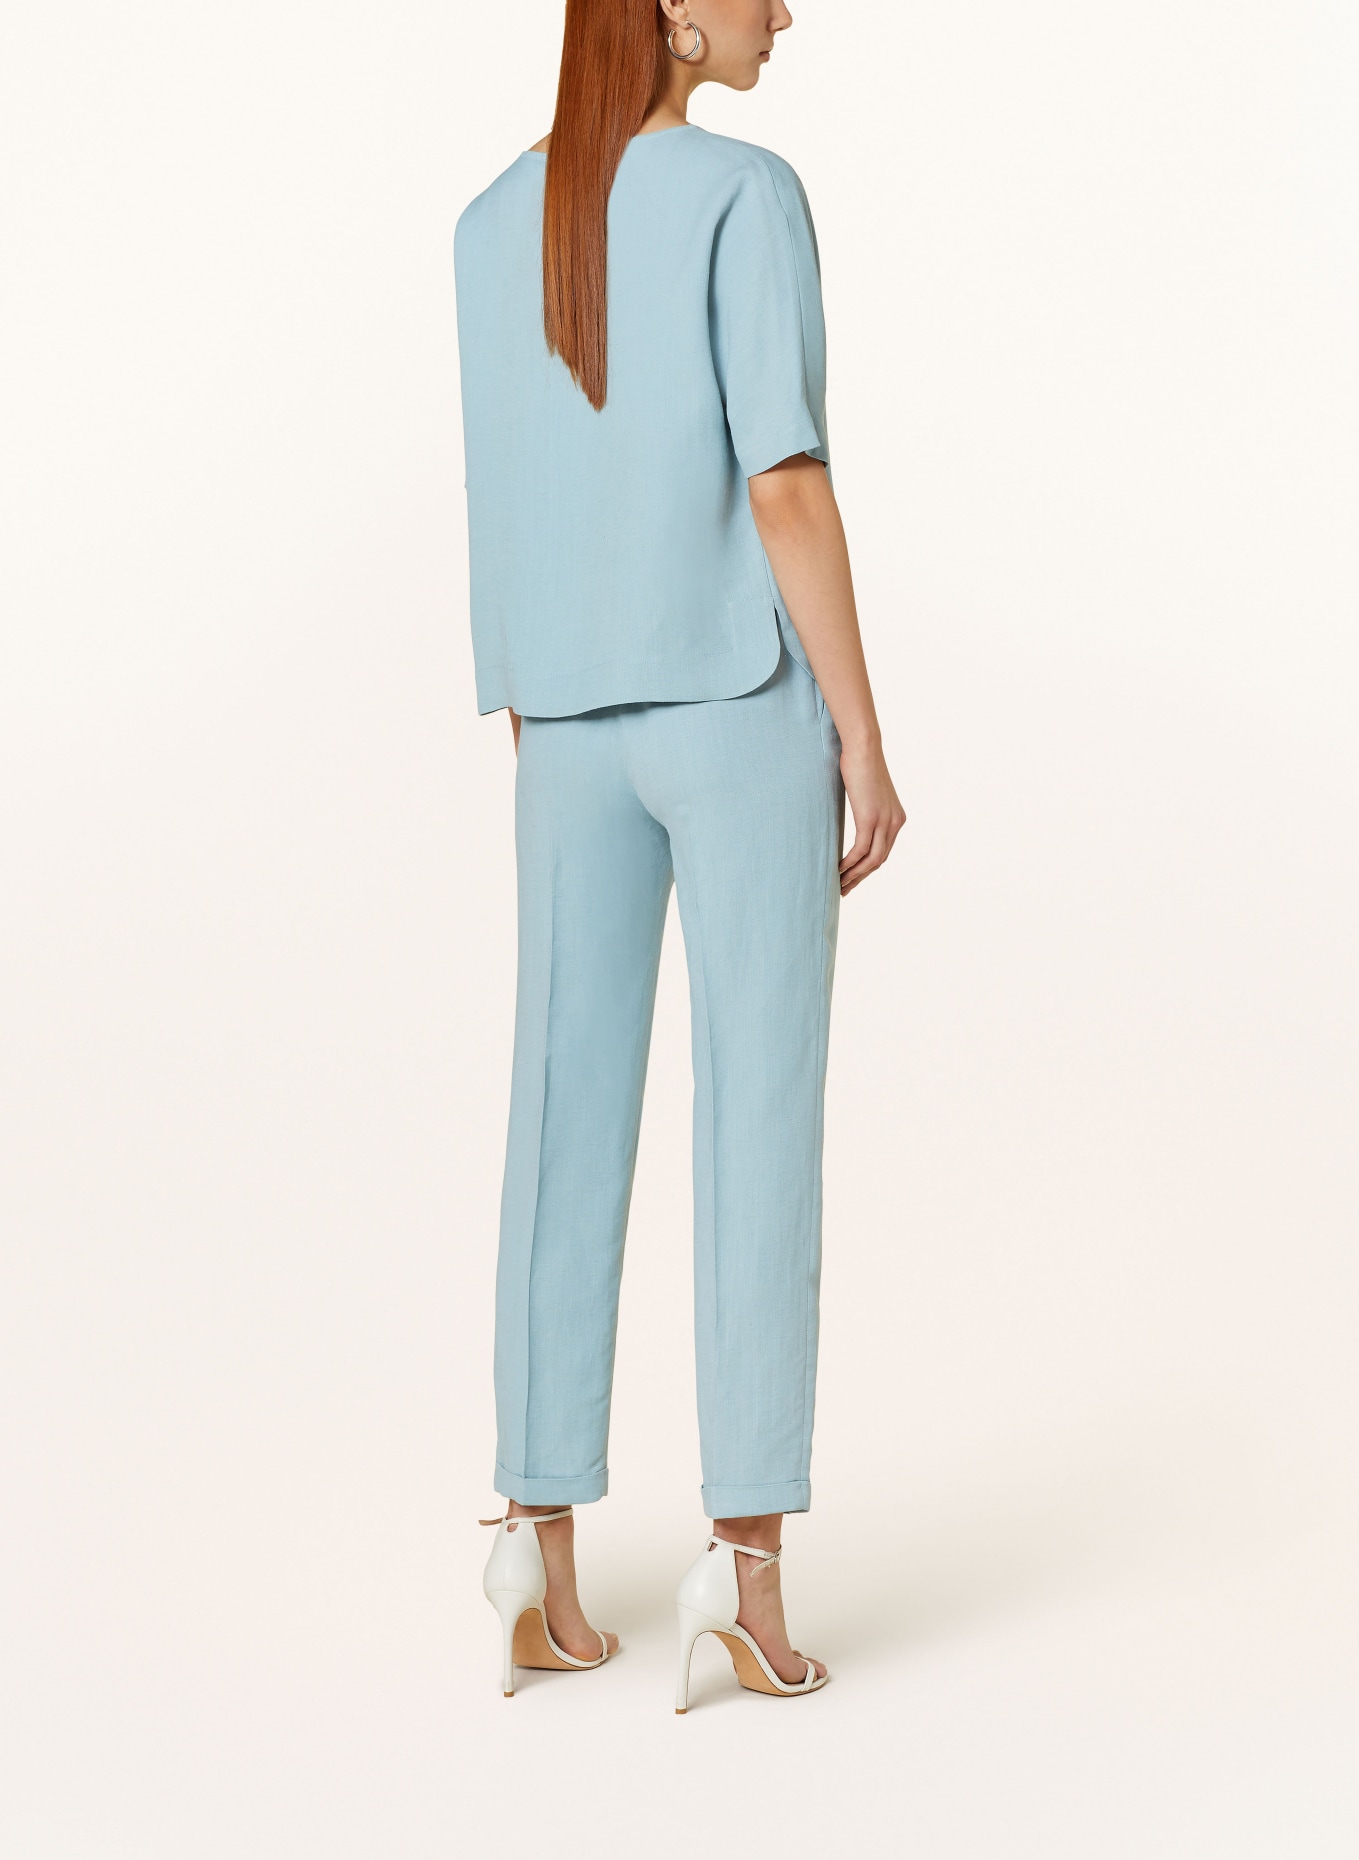 ANTONELLI firenze Shirt blouse DANIEL with 3/4 sleeves, Color: LIGHT BLUE (Image 3)